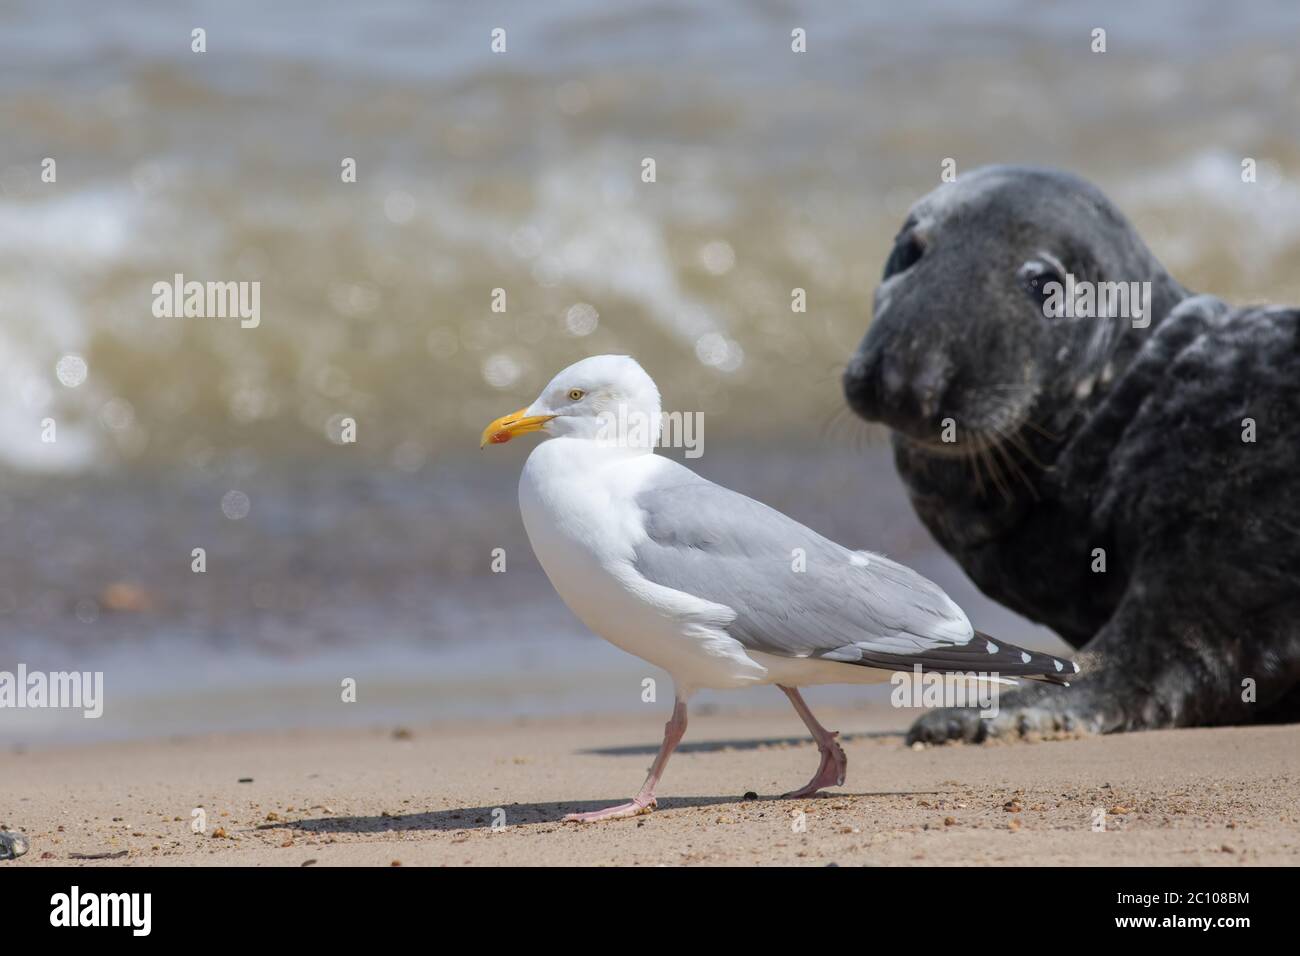 Coastal wildlife. Adult Herring gull (Larus argentatus) walking on the beach with a seal watching. Seagull at the Horsey grey seal colony Norfolk coas Stock Photo